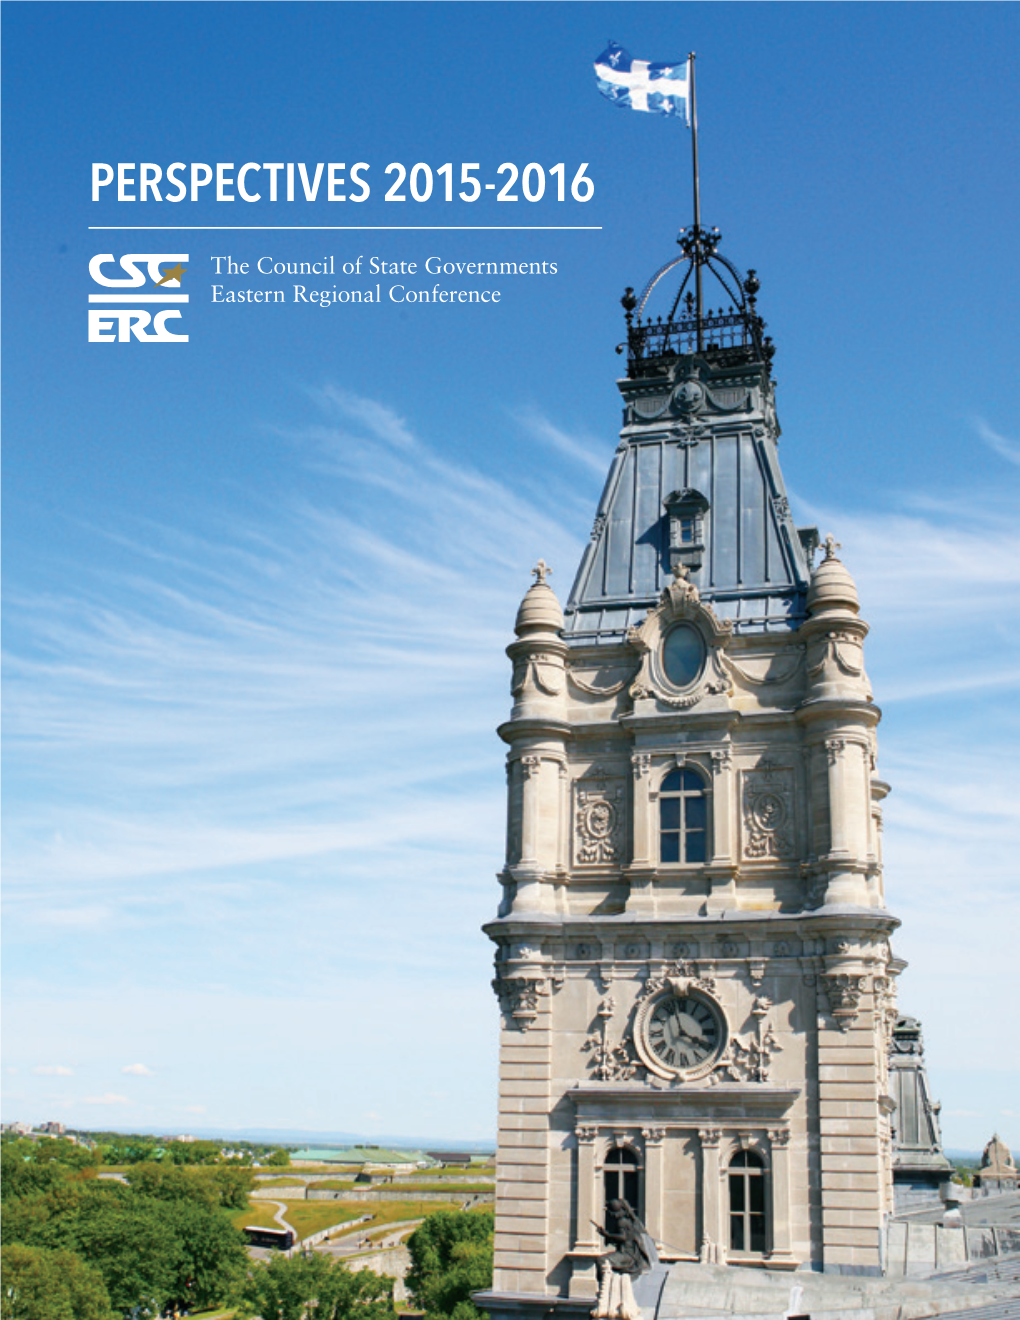 Annual Report, Perspectives 2015-2016